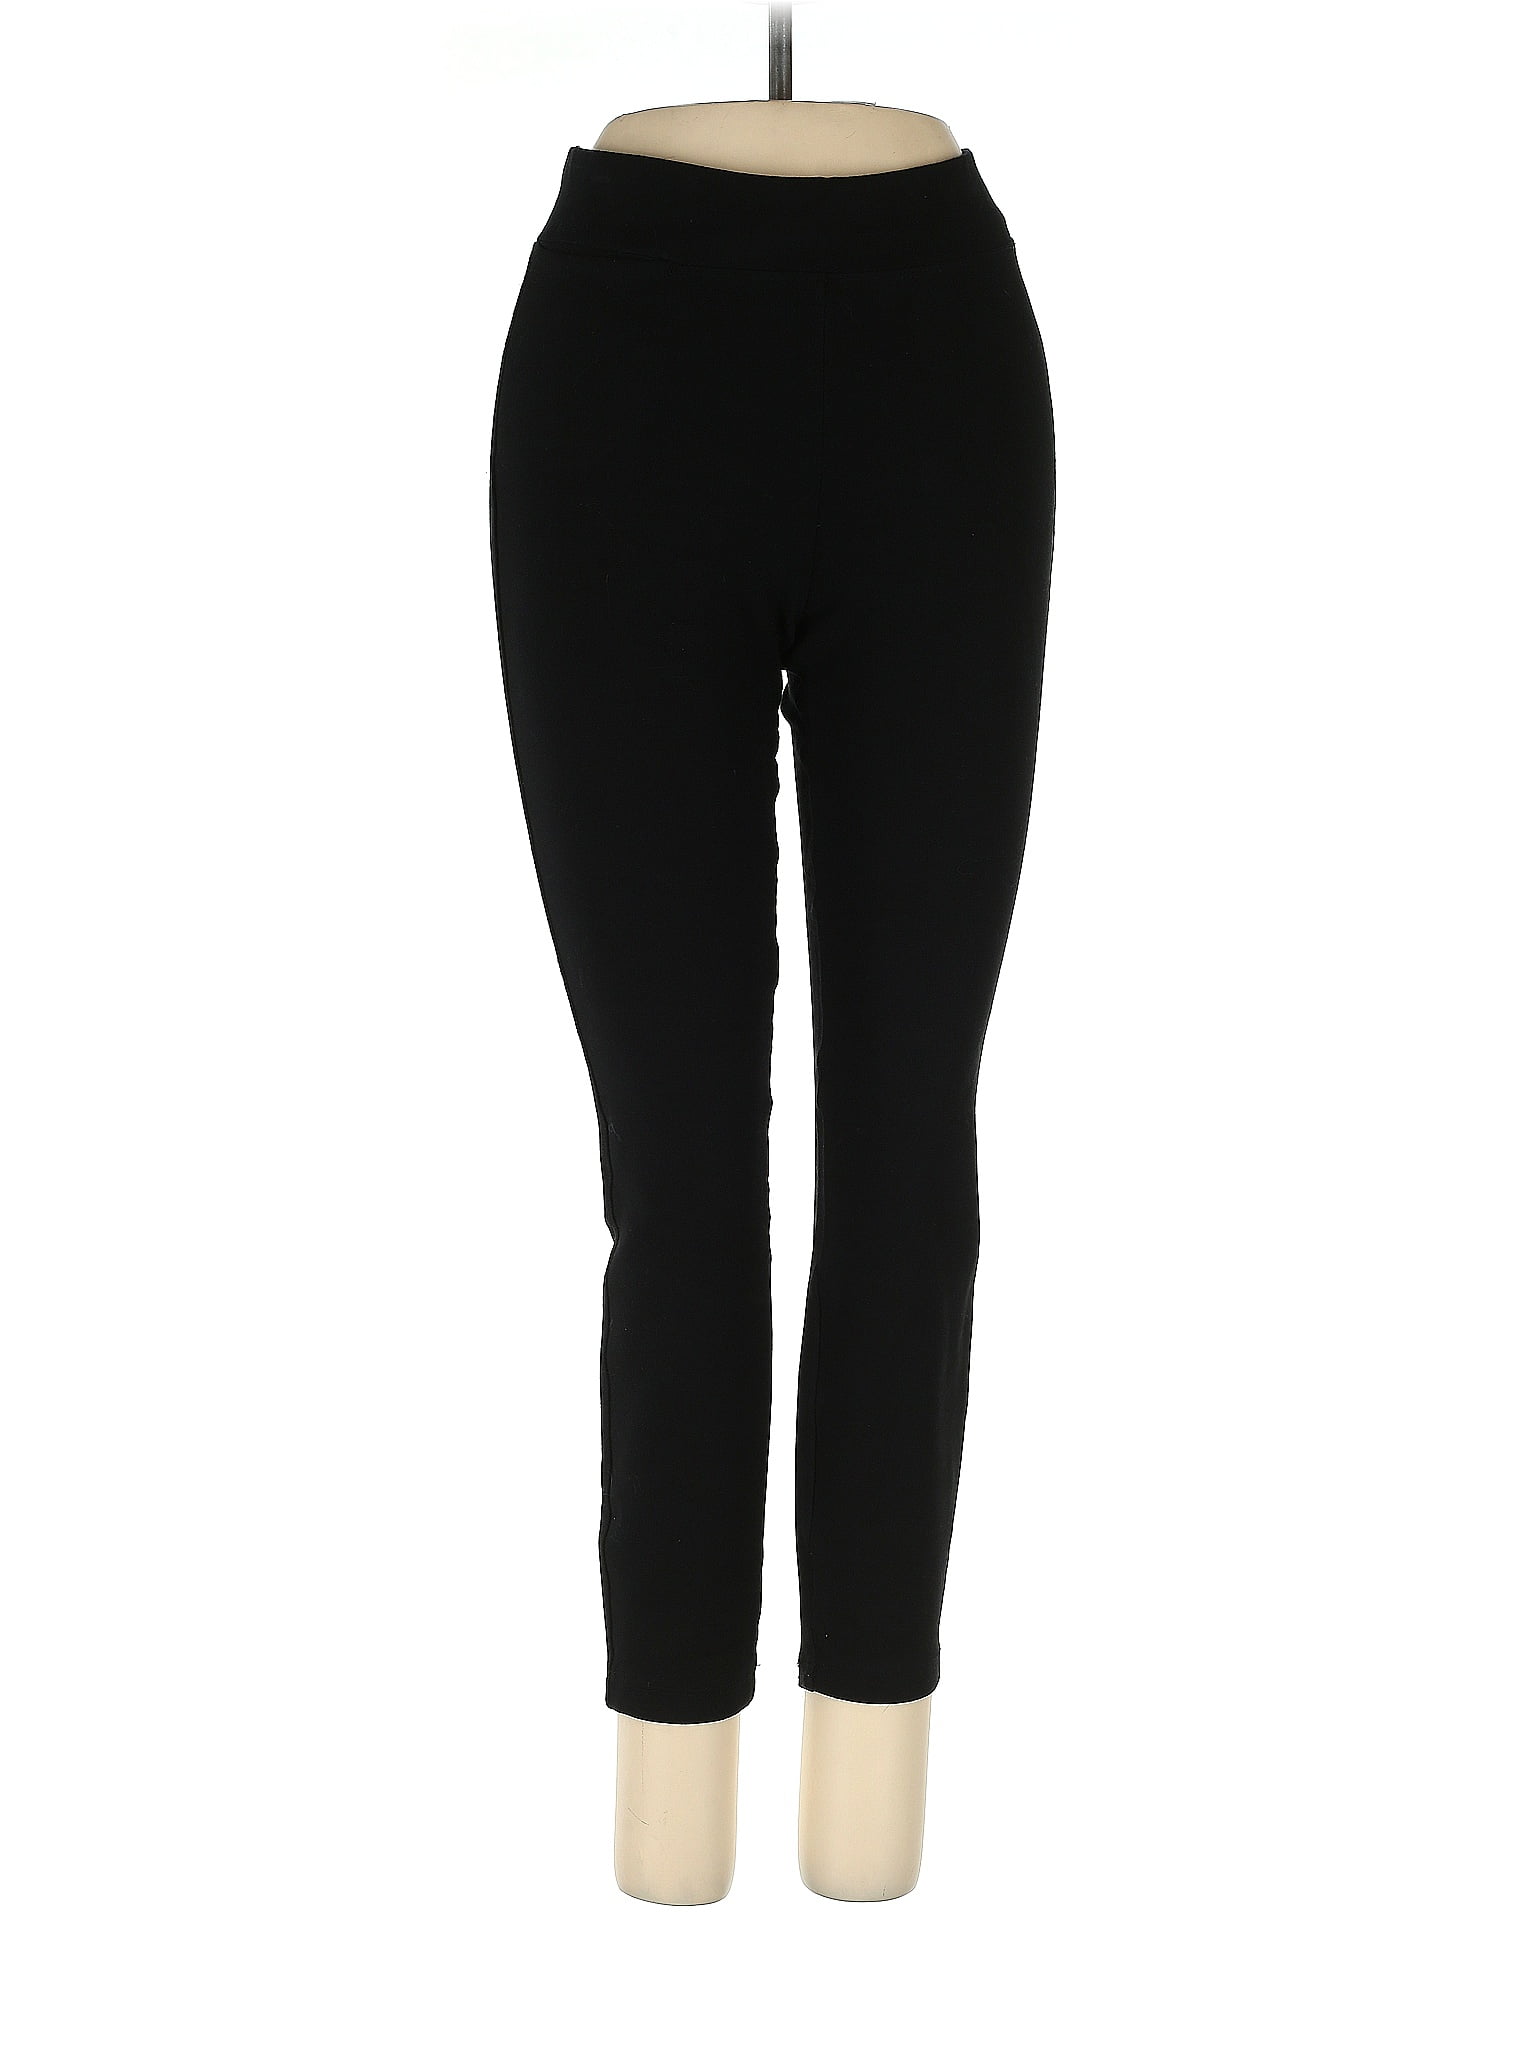 Quince Women's Pants On Sale Up To 90% Off Retail